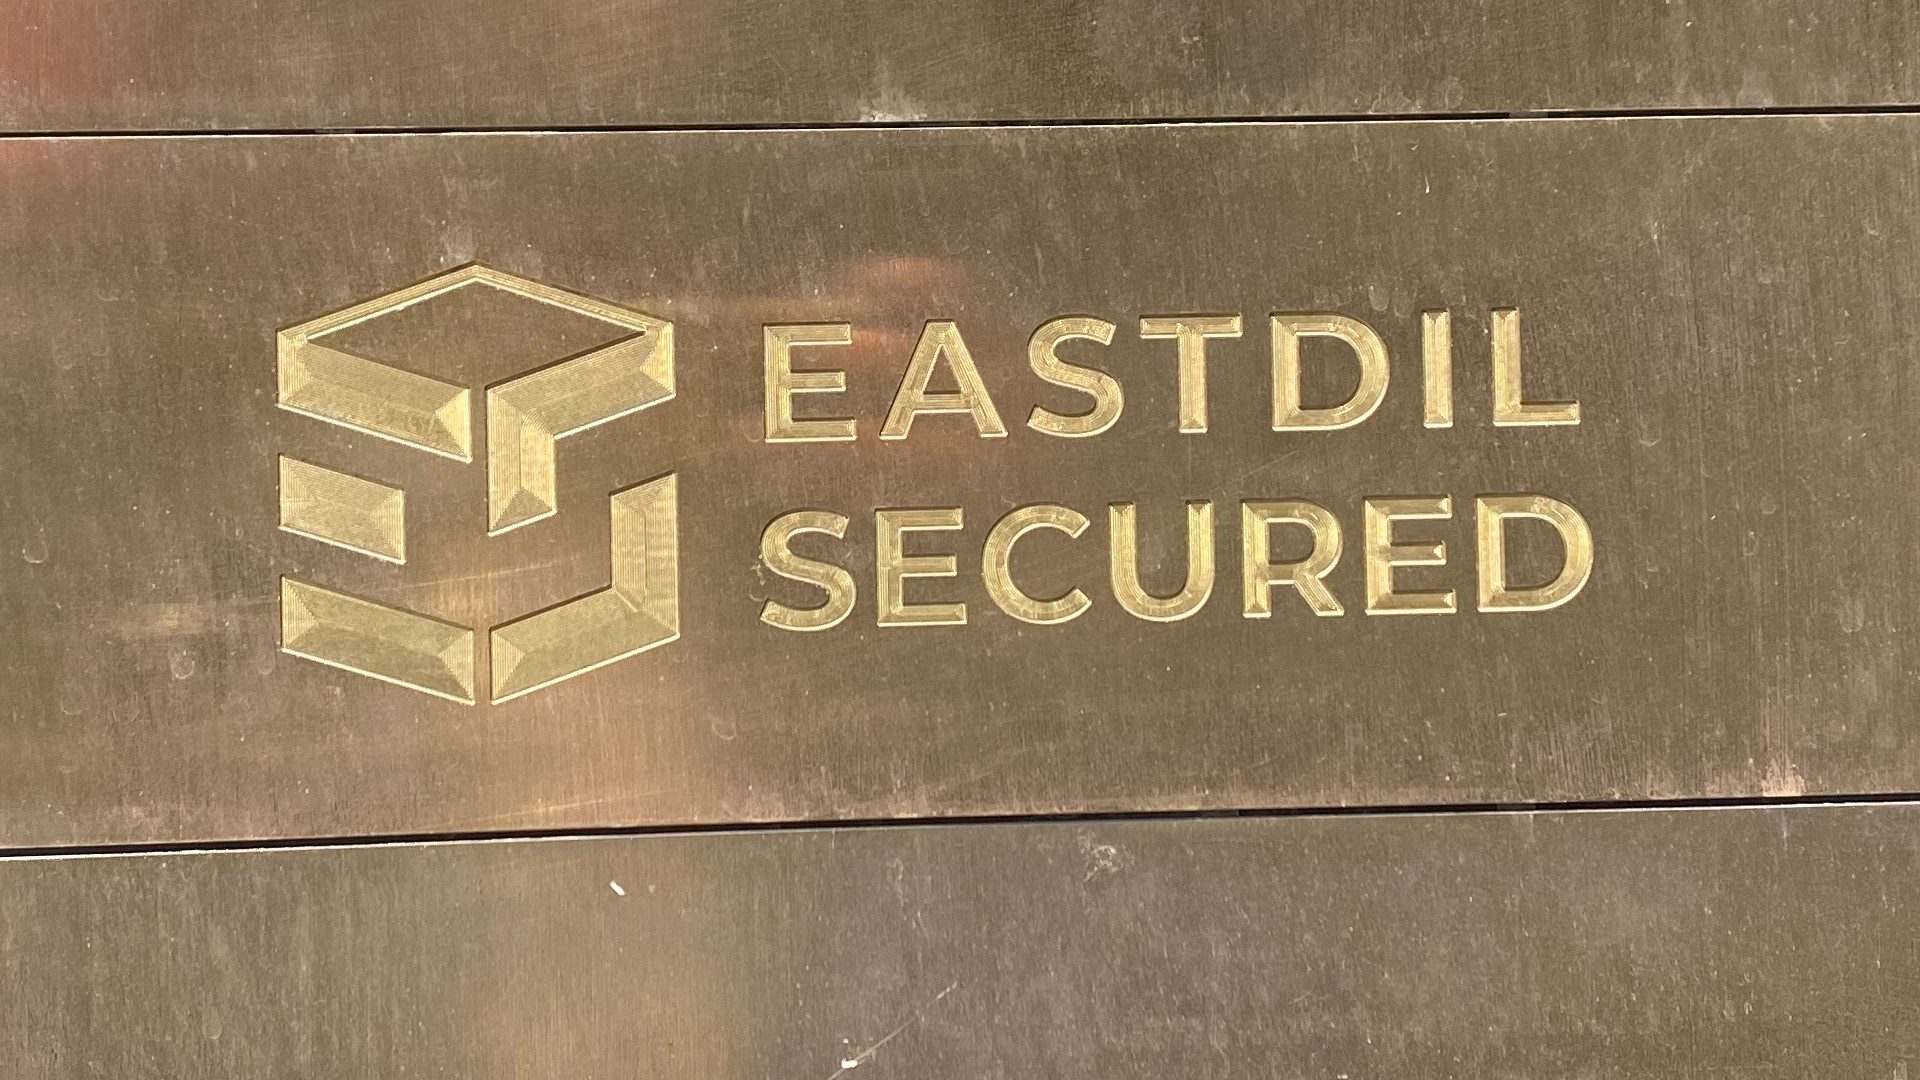 eastdil-secured-picks-trophy-west-end-project-for-new-uk-hq-react-news